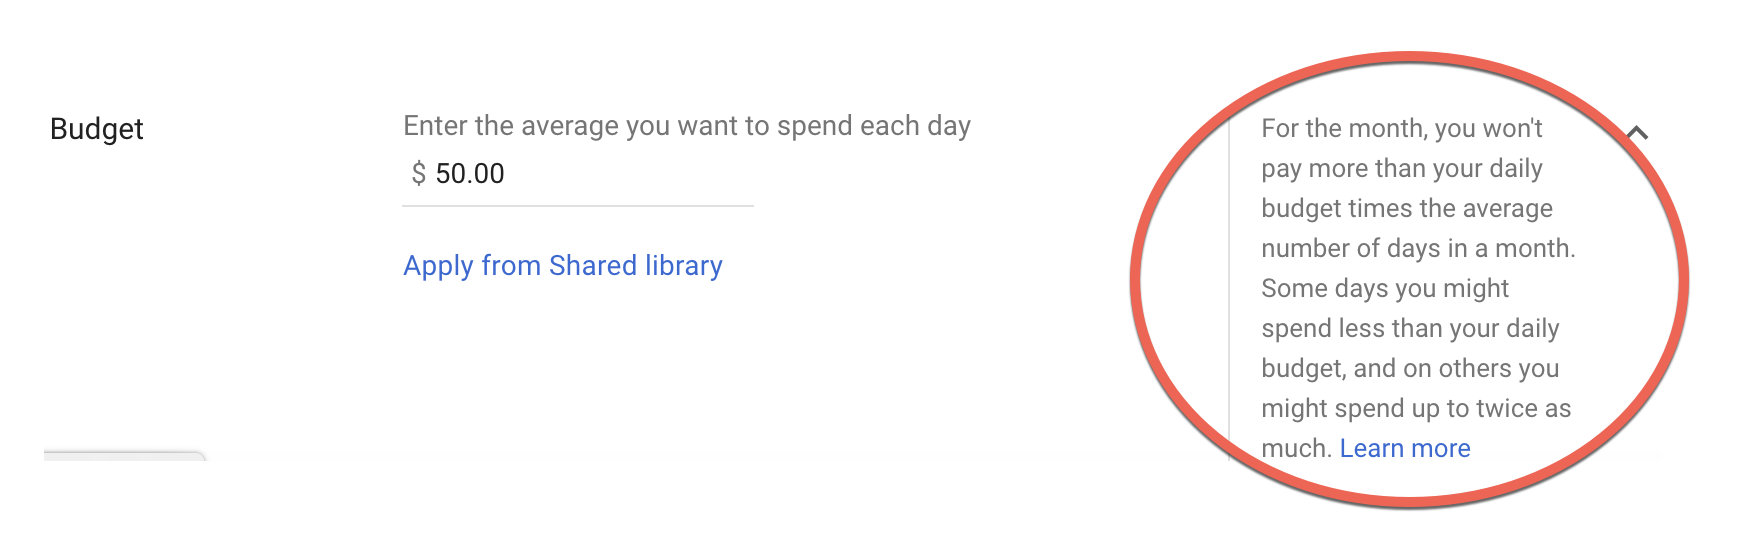 Warning message when you set your daily budget in PPC